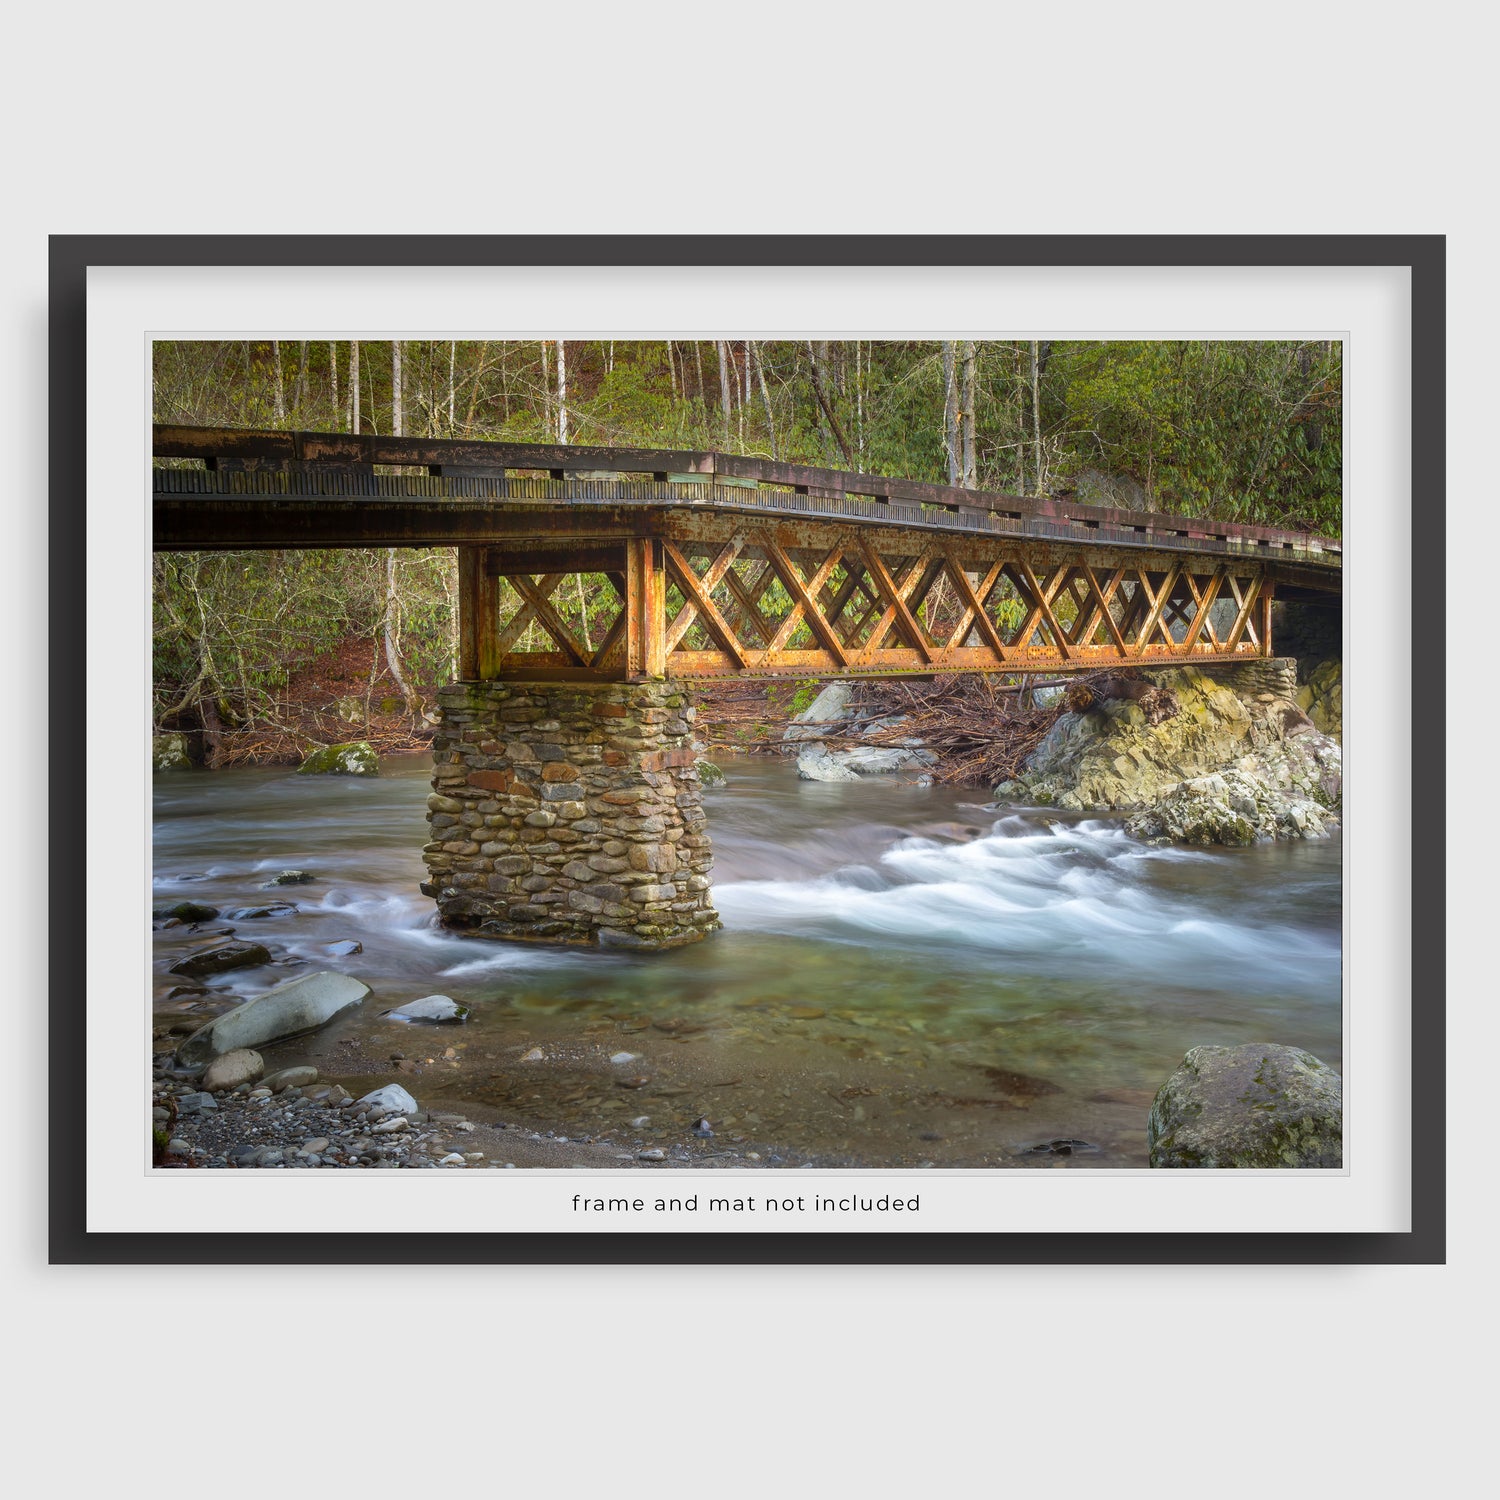 Image displaying a rustic bridge wall art print within a thin black frame and white mat, meant to inspire potential display options. The actual product is the print only; the frame and mat are not included with purchase.